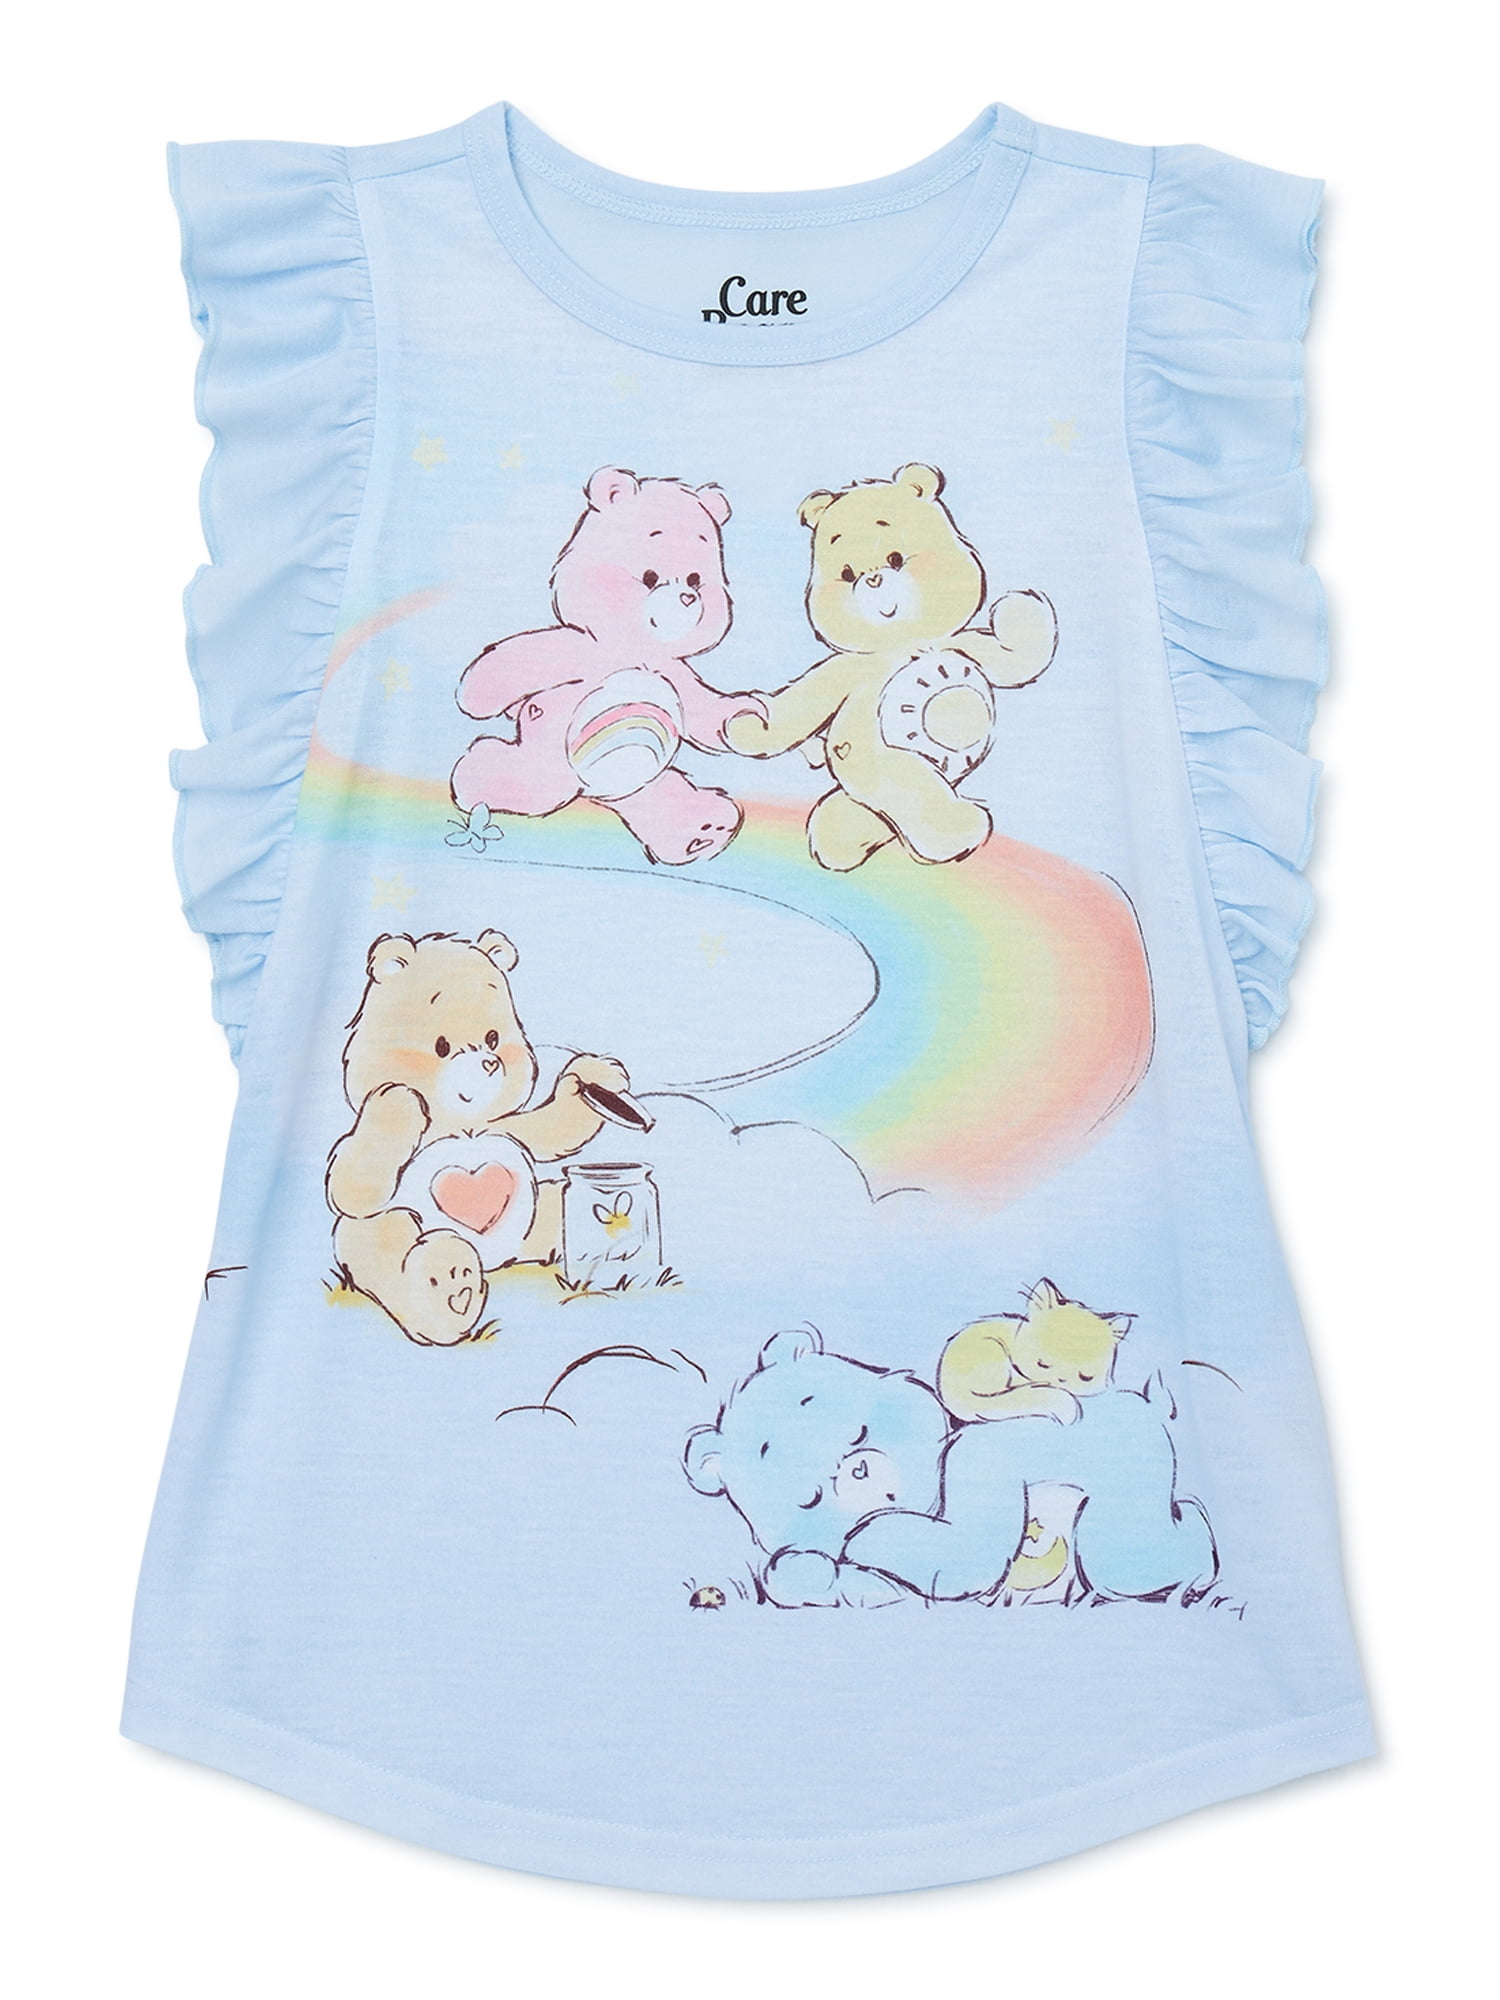 Care Bears Toddler Girl Nightgown, Sizes 2T-5T